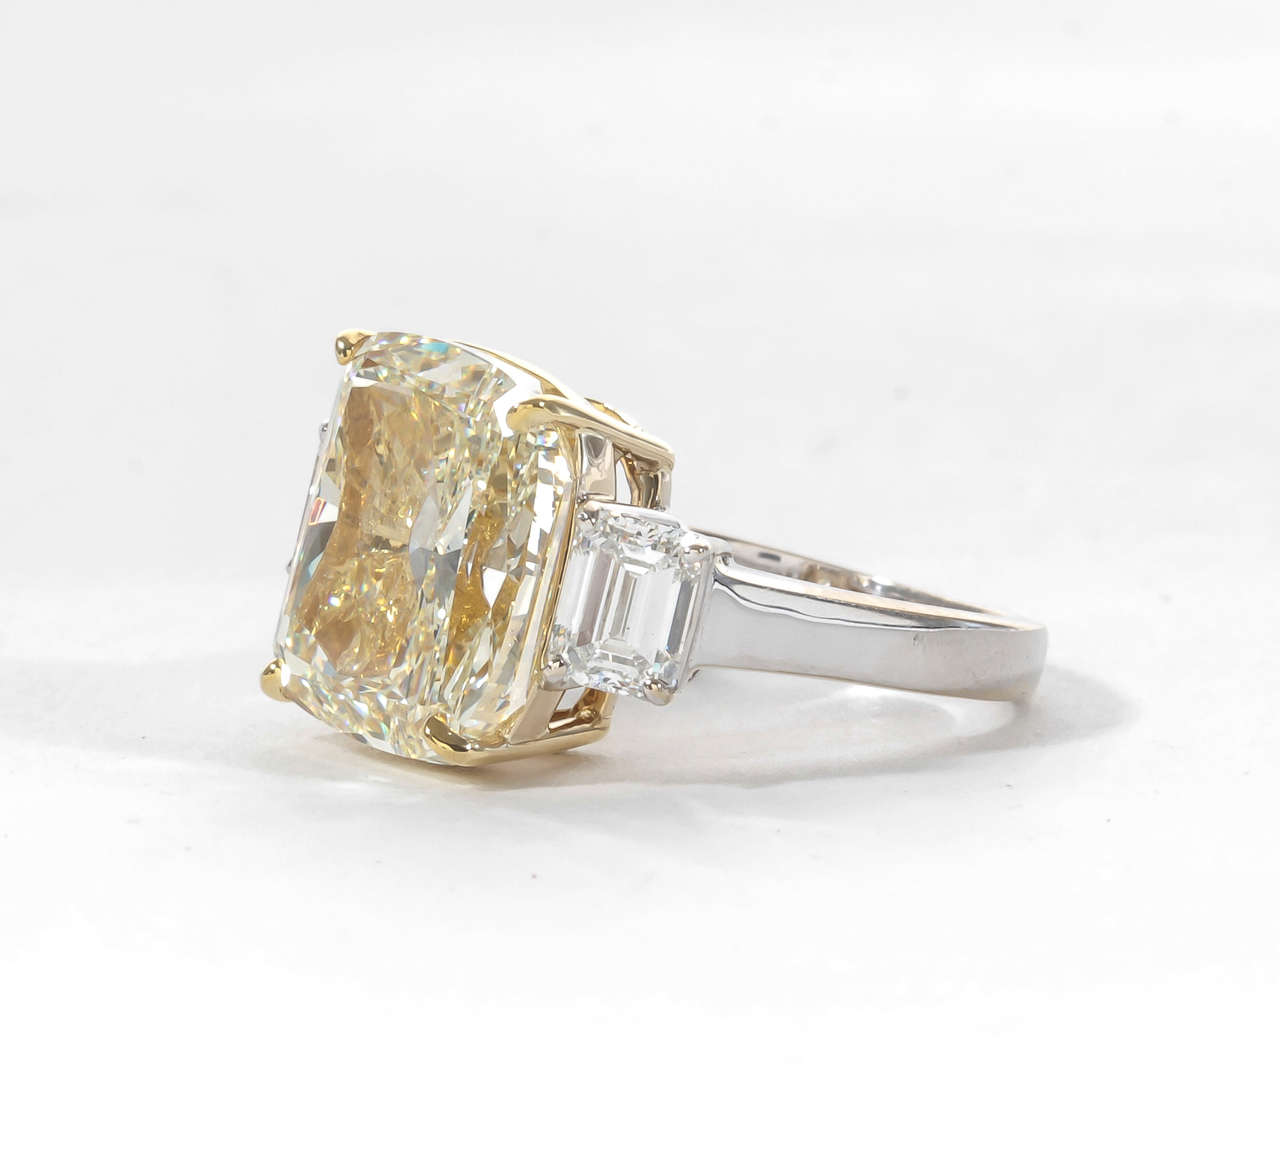 Impressive and brilliant 10.06 cushion cut Fancy Yellow, VS2 center diamond. 
1.41 carats of F color Vs clarity Emerald cut side diamonds all set in 18k gold.

This ring is a WOW!